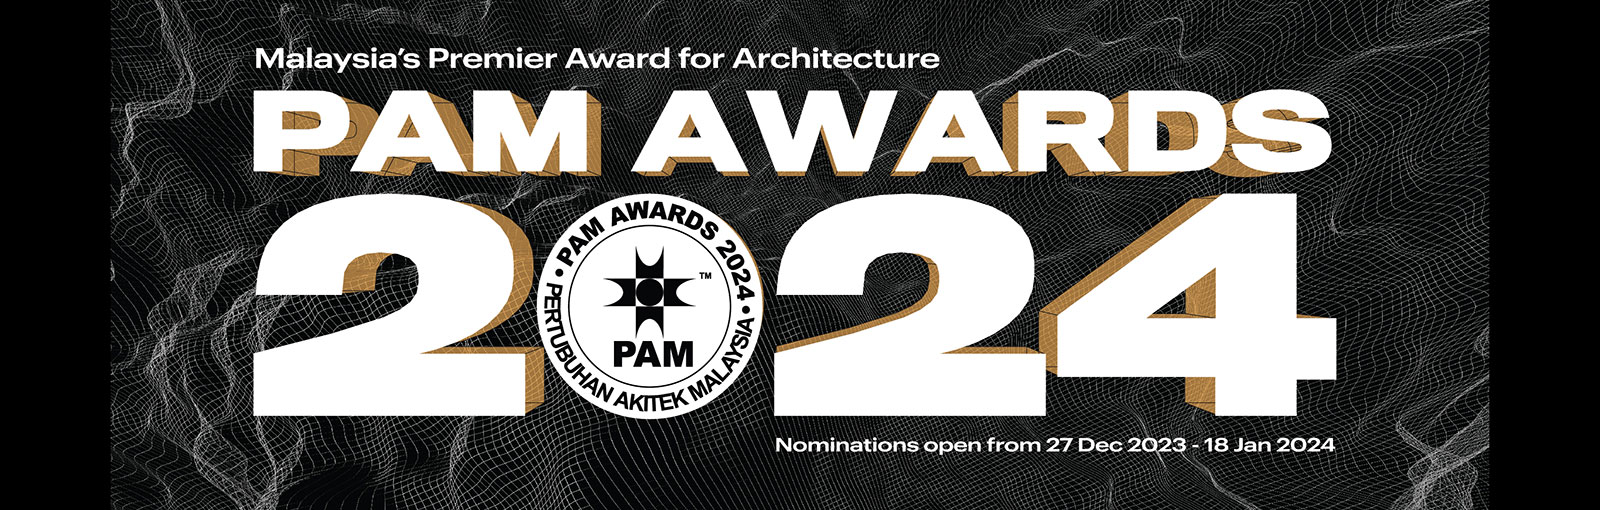 PAM Awards 2024 Calling for Nomination